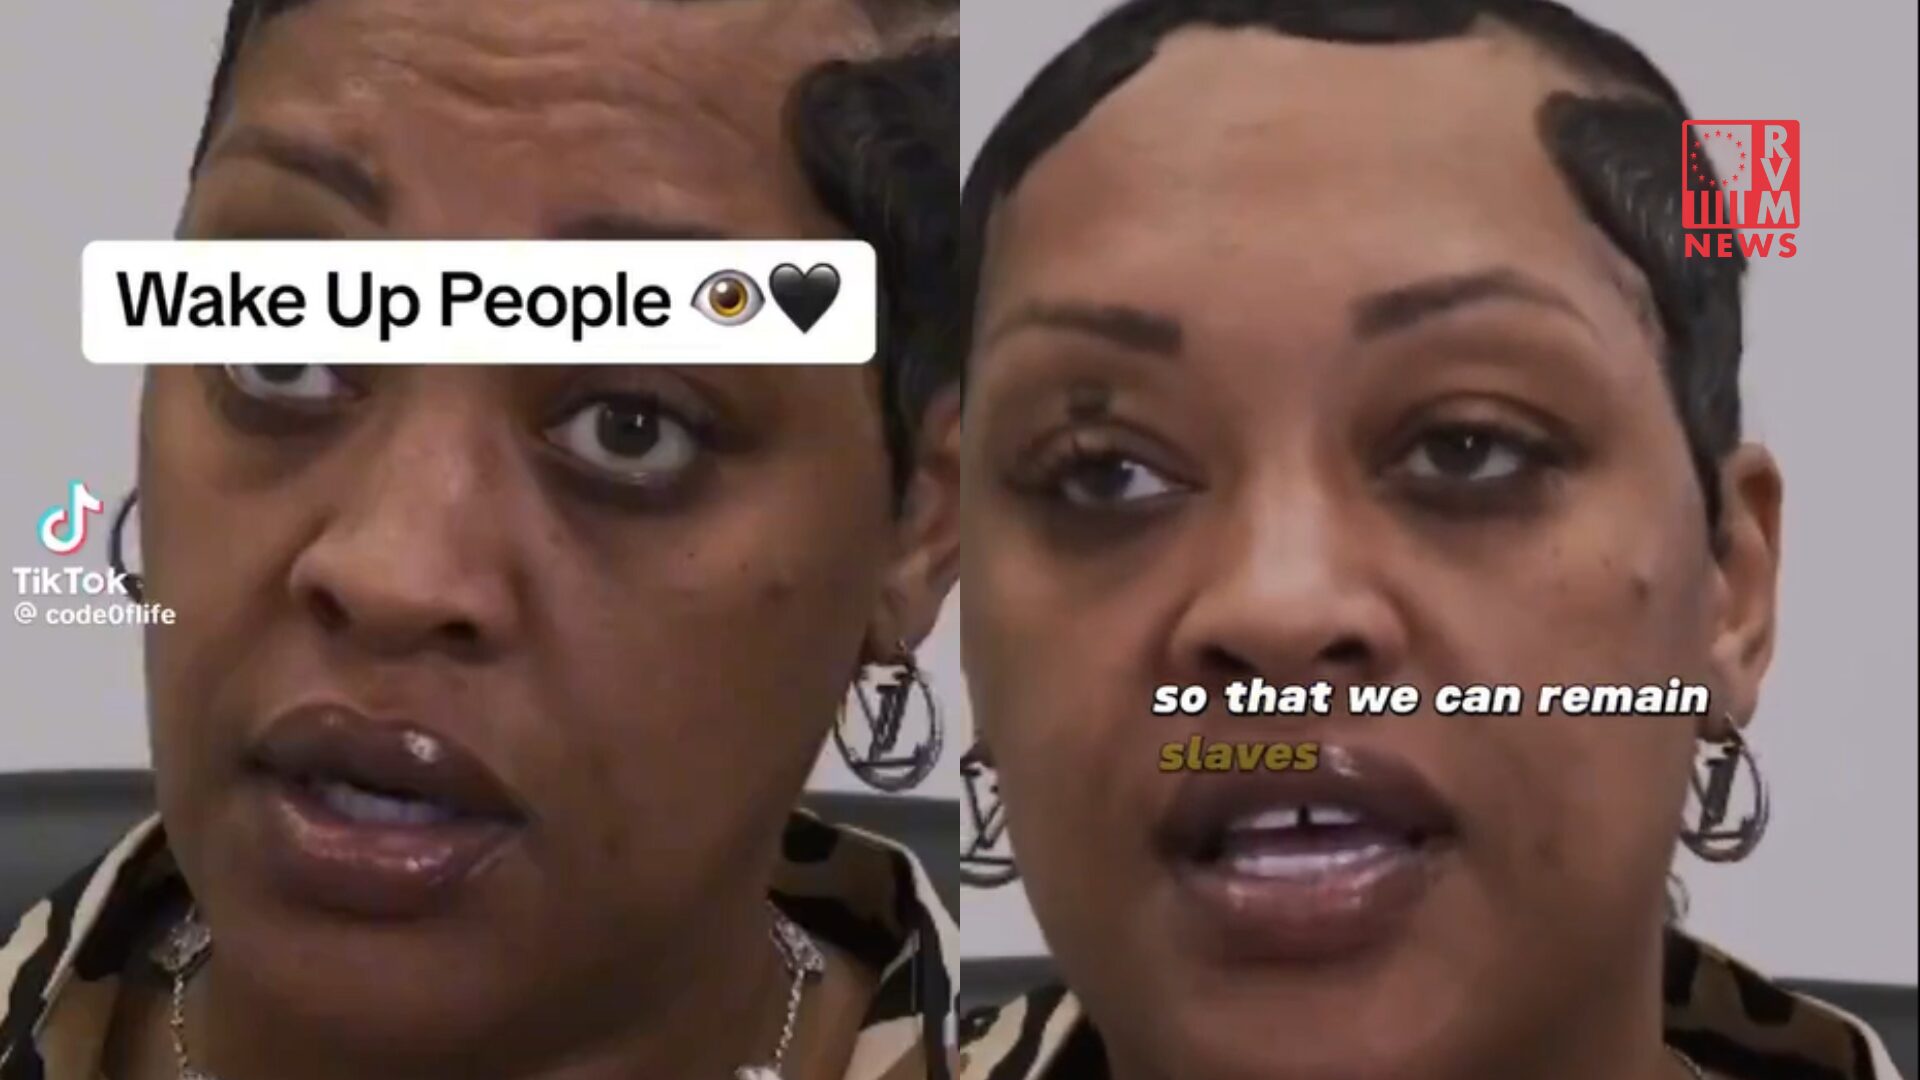 Woman Calls Out Democrats Plan To Keep The Black Community On their Plantation [VIDEO]